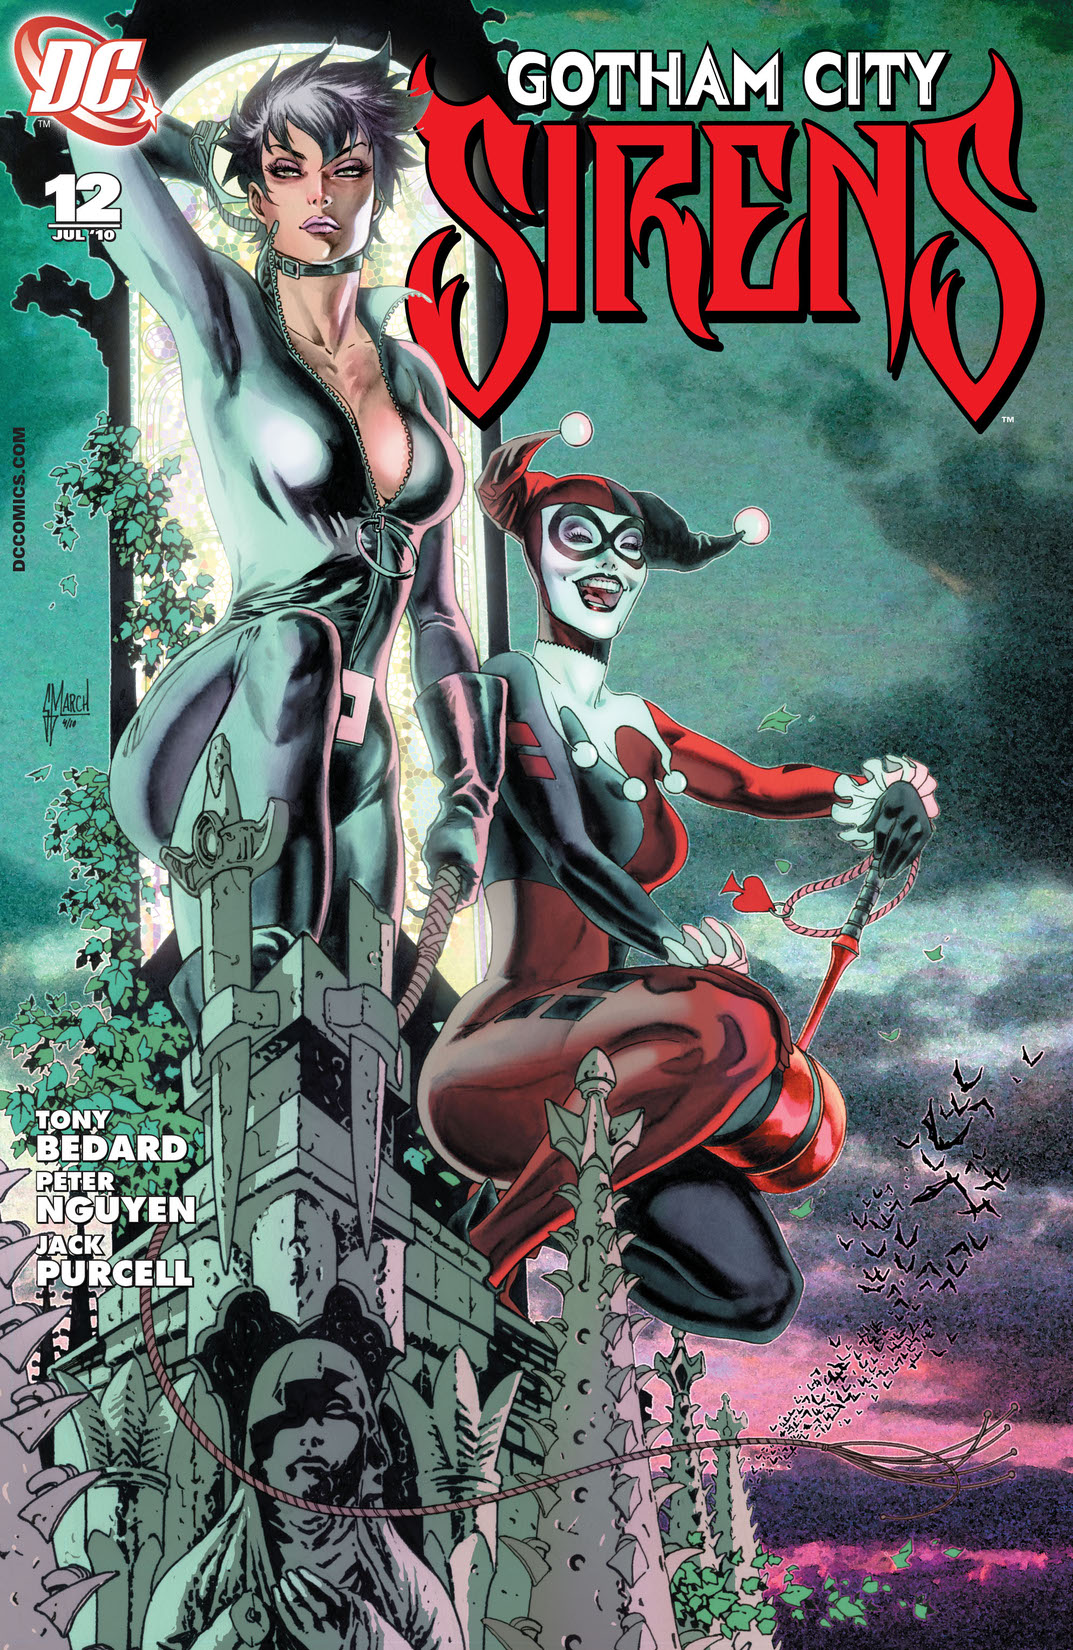 Gotham City Sirens #12 preview images